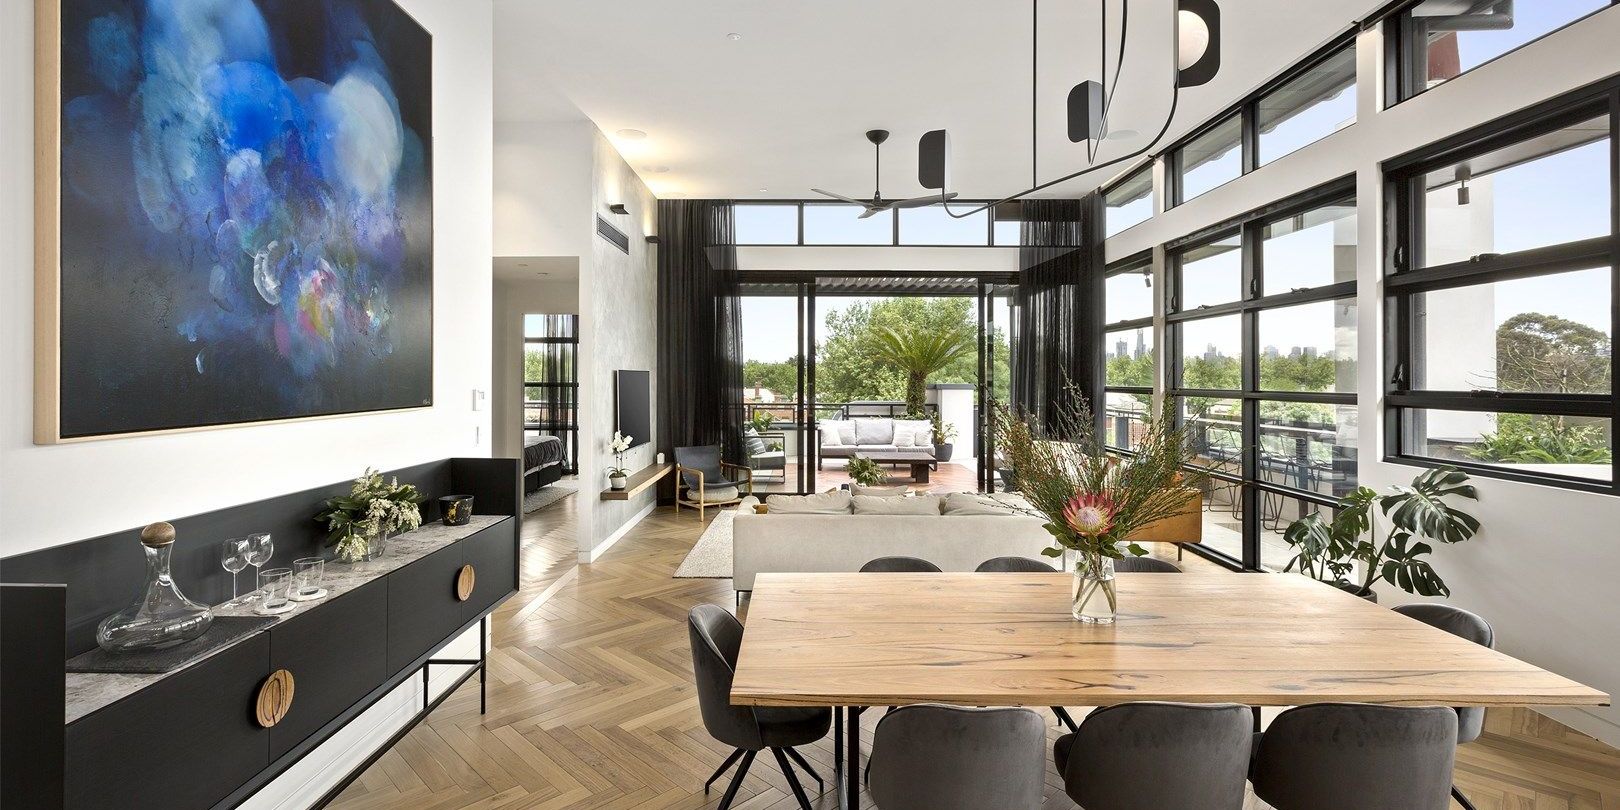 The Block's million-dollar penthouses are now available to rent